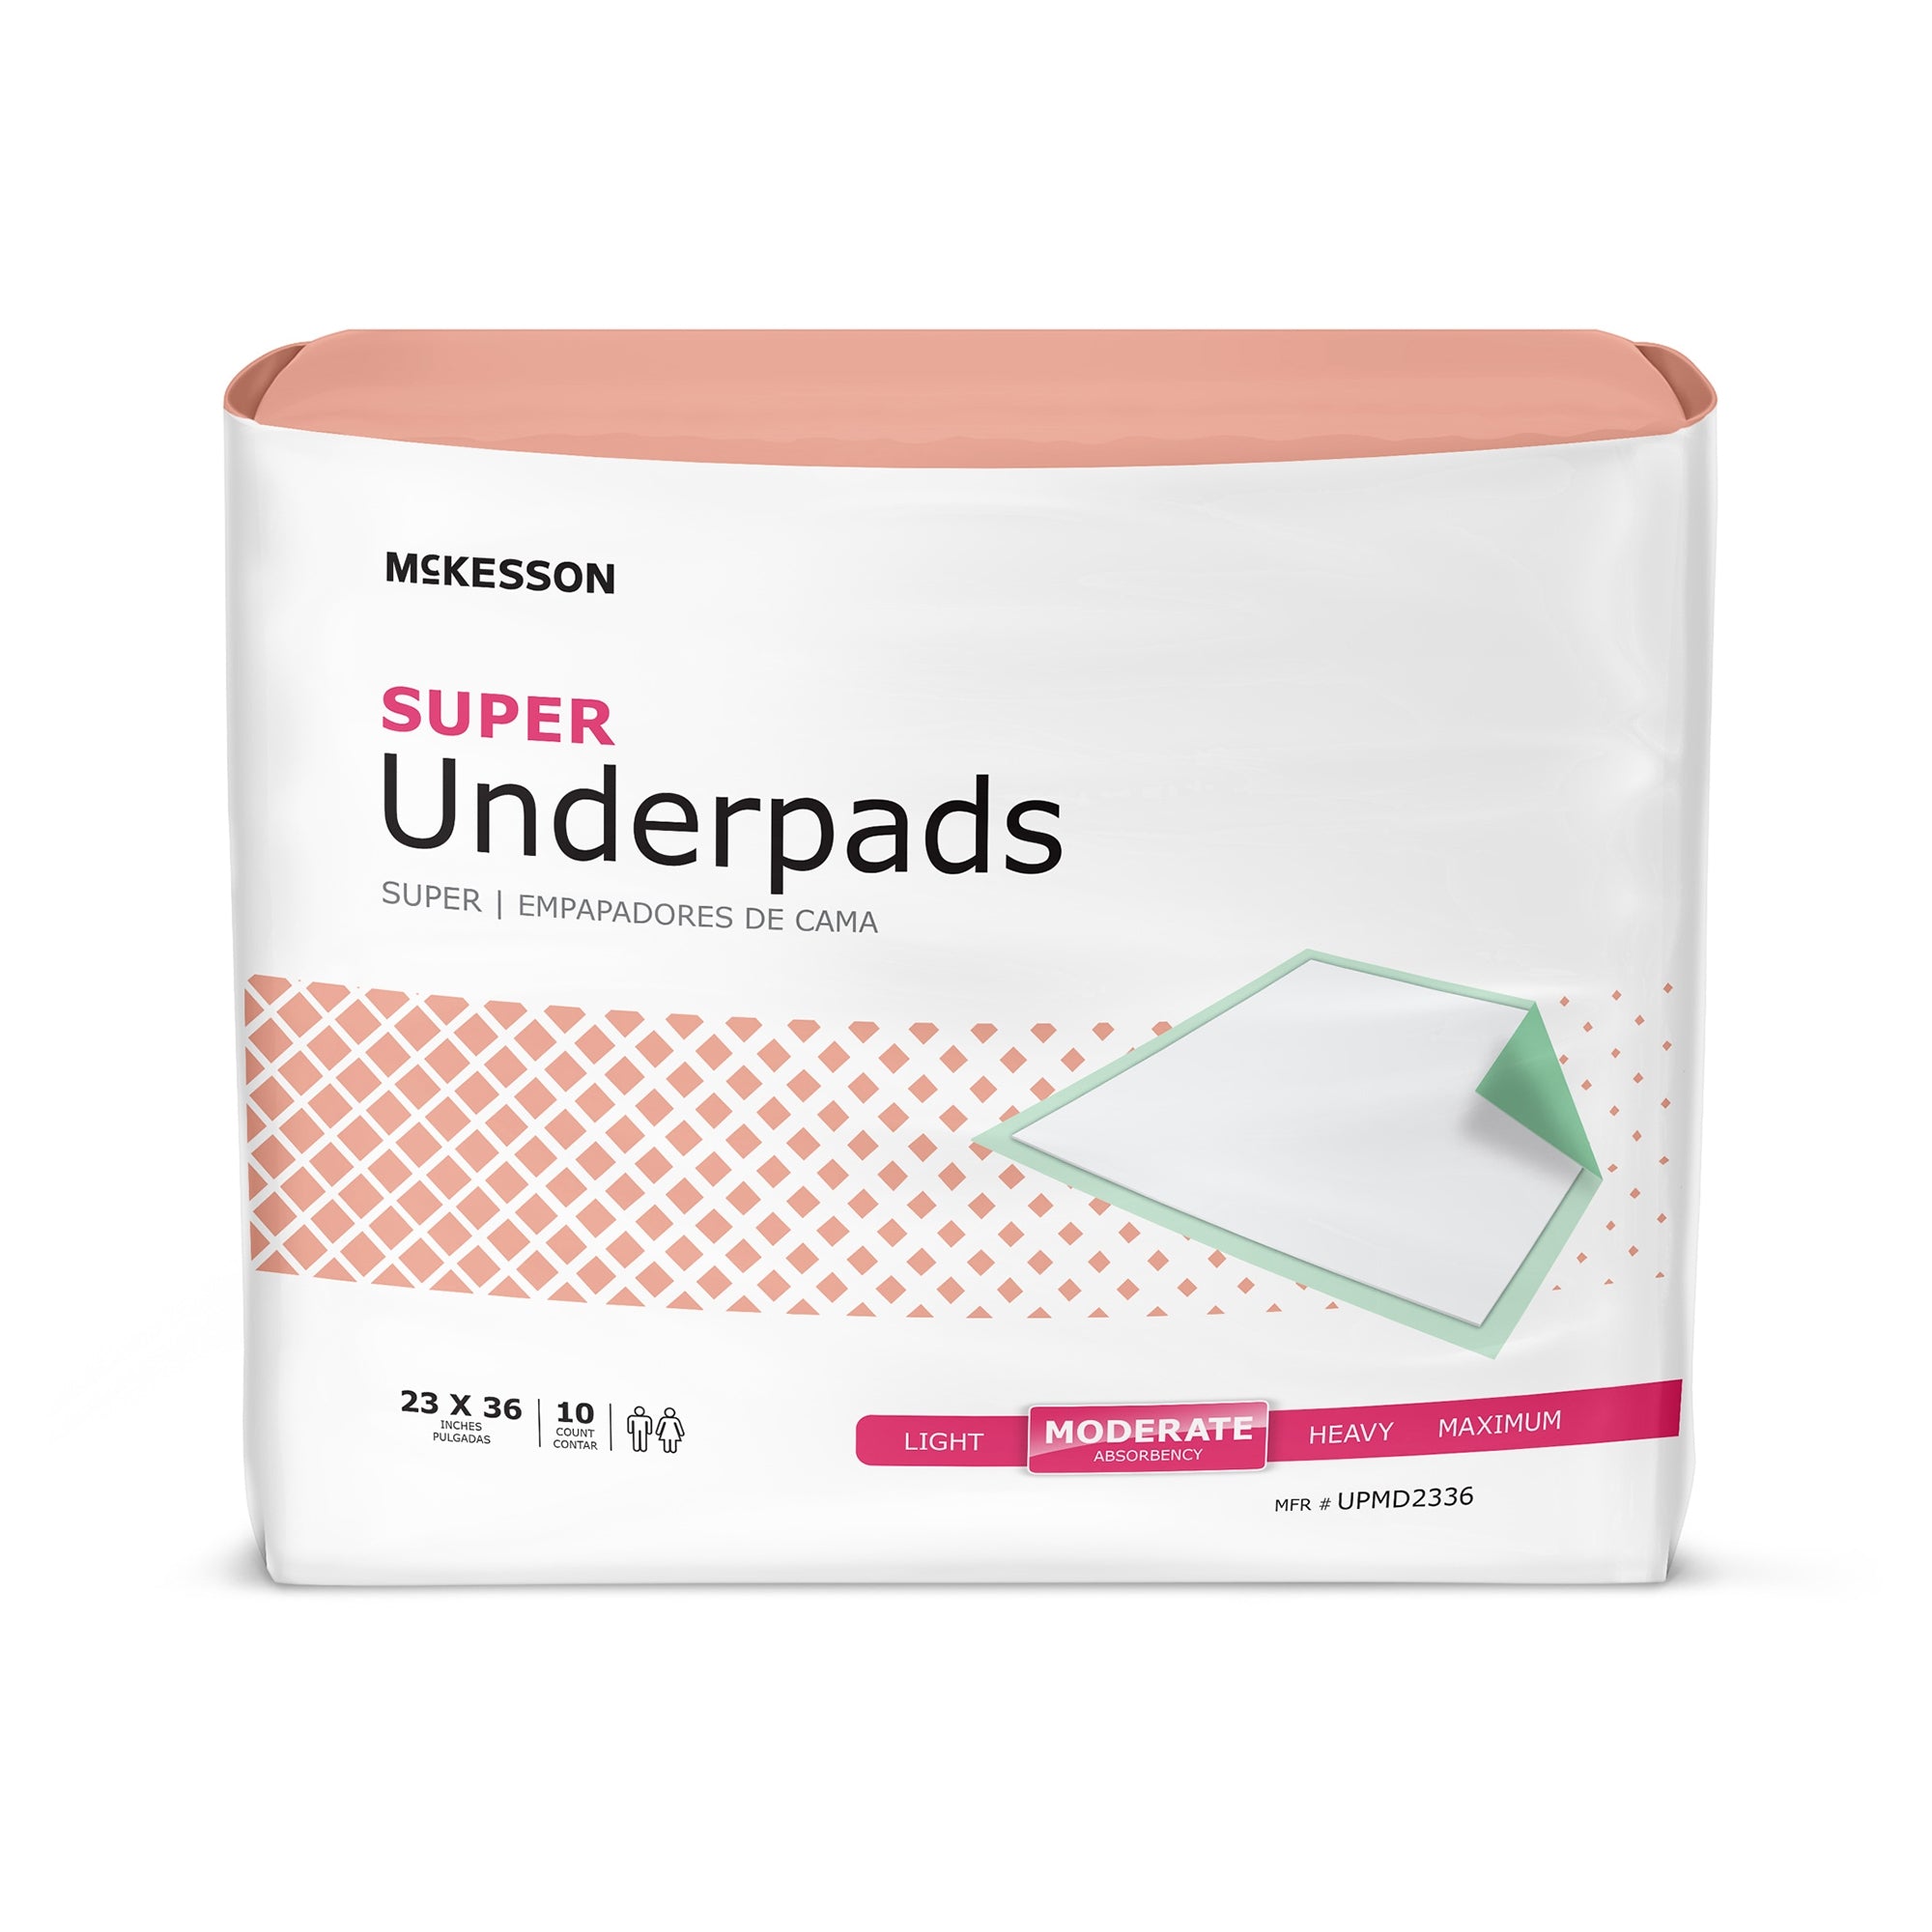 McKesson Super Absorbent Underpads 23x36, Moderate Absorbency - 10 Pack